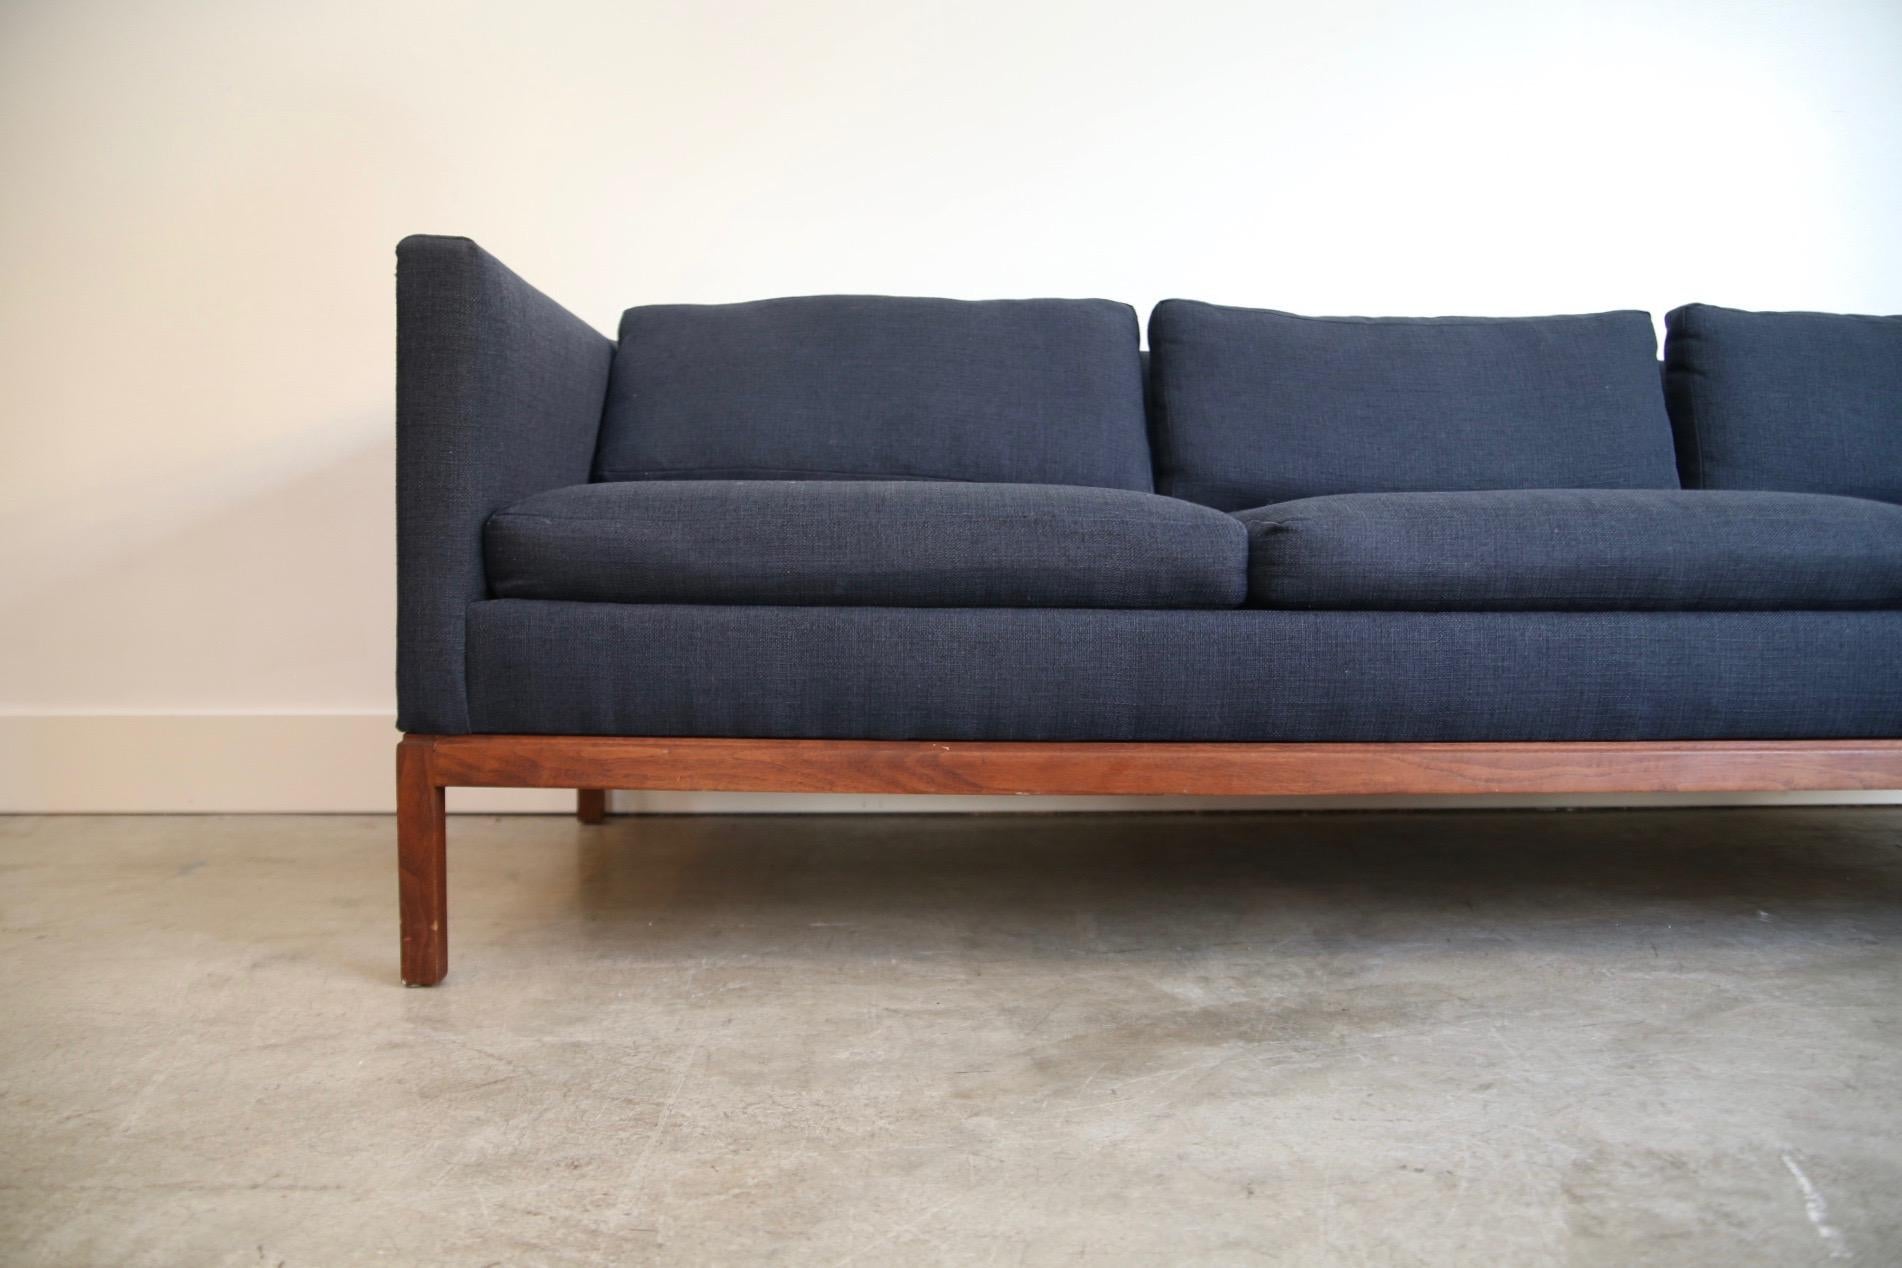 Designer: Unknown
Manufacture: Unknown
Period/style: Mid-Century Modern
Country: US
Date: 1950s.

Completely RAD KILLER low sits couch. Fully functioning couch. 70 years old and doesn't even feel like it. Sits amazingly. 